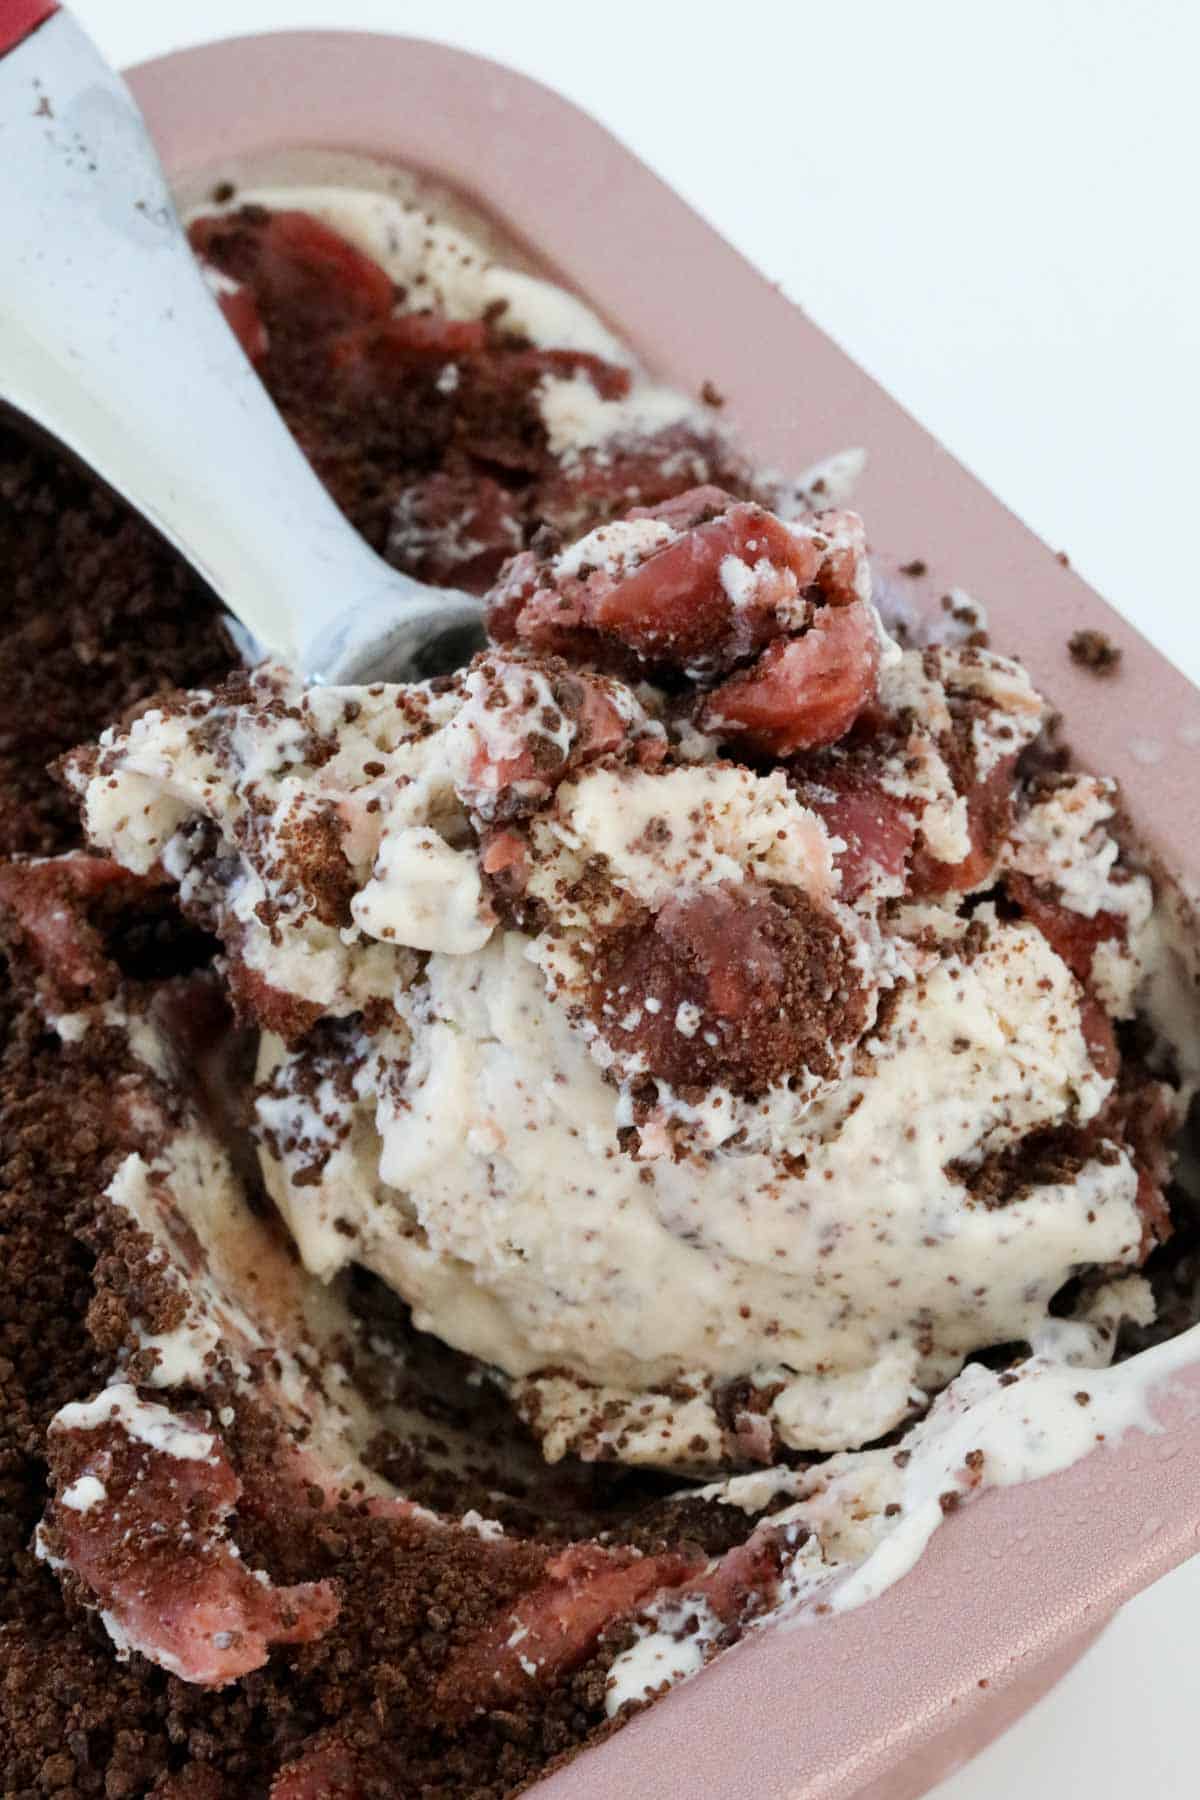 A close up of a spoonful of ice cream showing chunks of cherry and grated chocolate throughout.